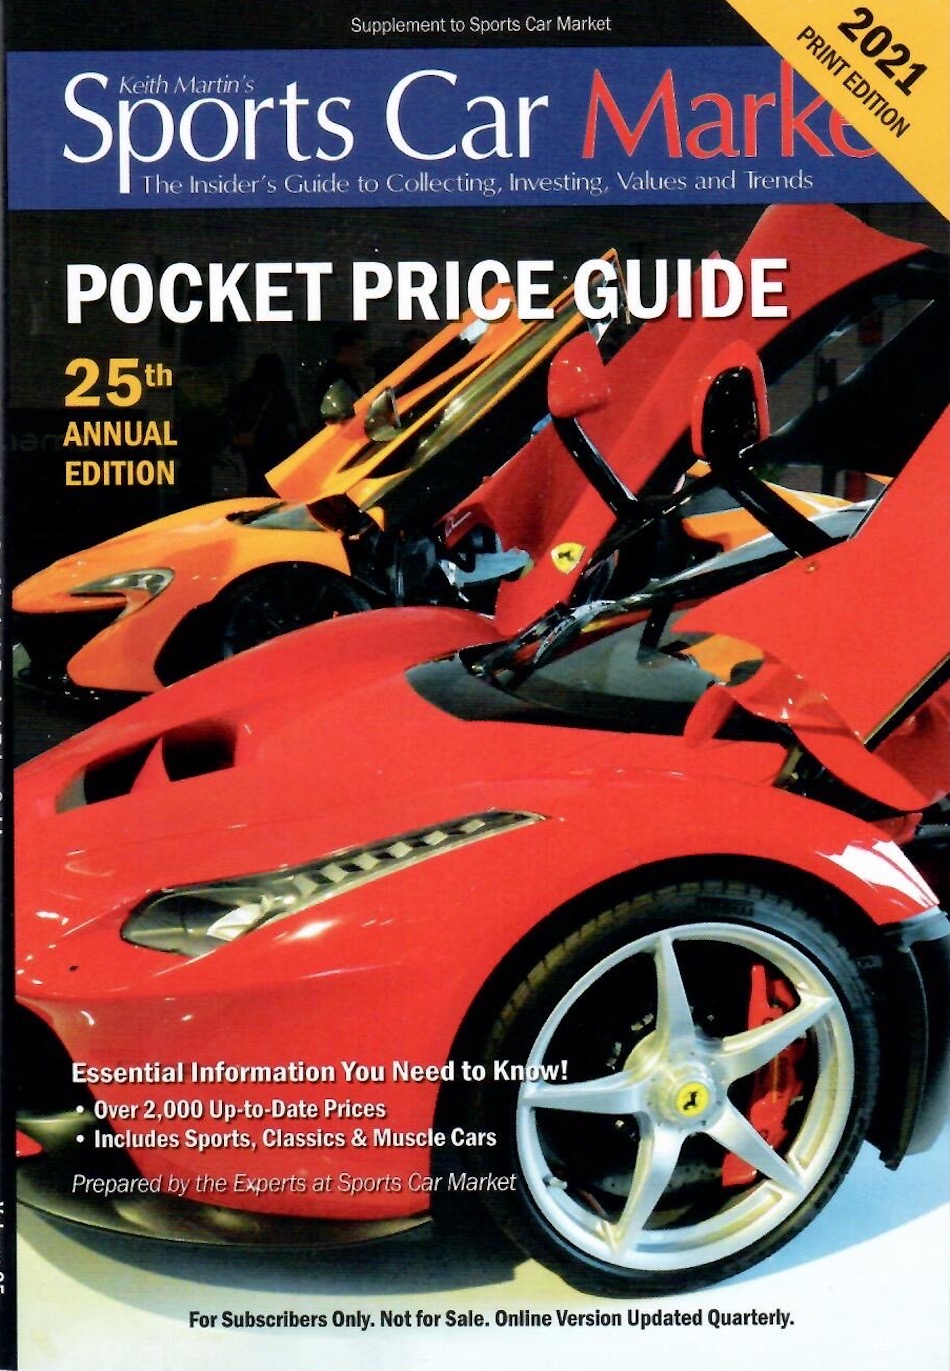 The 2021 Sports Car Market Pocket Price Guide